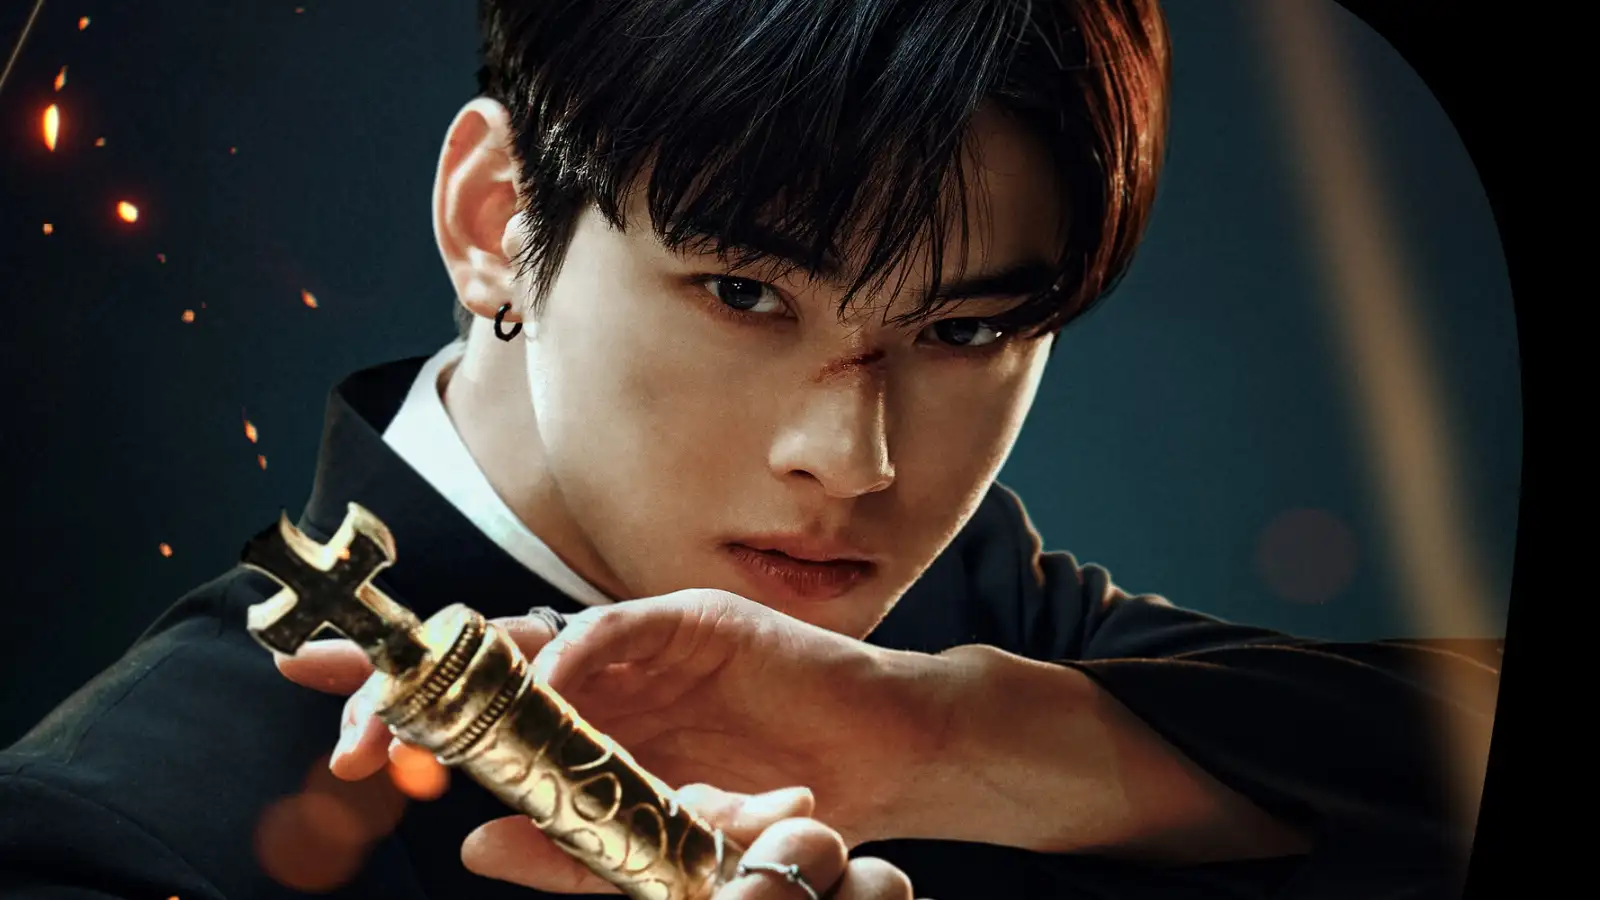 EXCLUSIVE: ASTRO's Cha Eun Woo talks about bruising himself while working  on K-drama Island